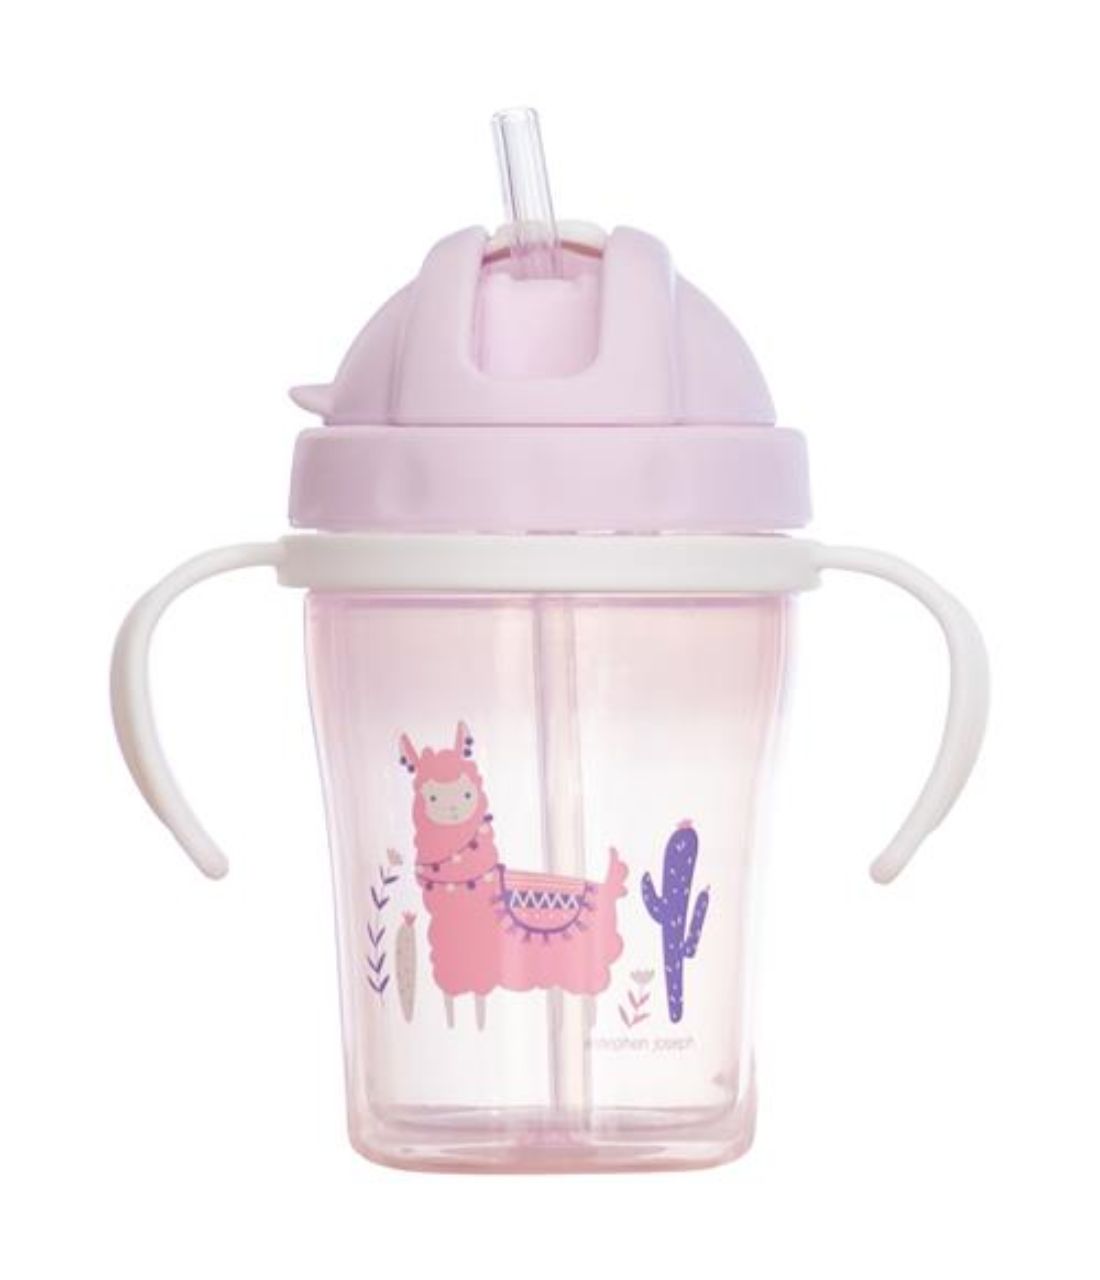 https://seasideshenanigans.com/wp-content/uploads/2020/07/Stephen-Joseph-Sippy-Cups-For-Toodlers-With-Straw-Llama.jpg